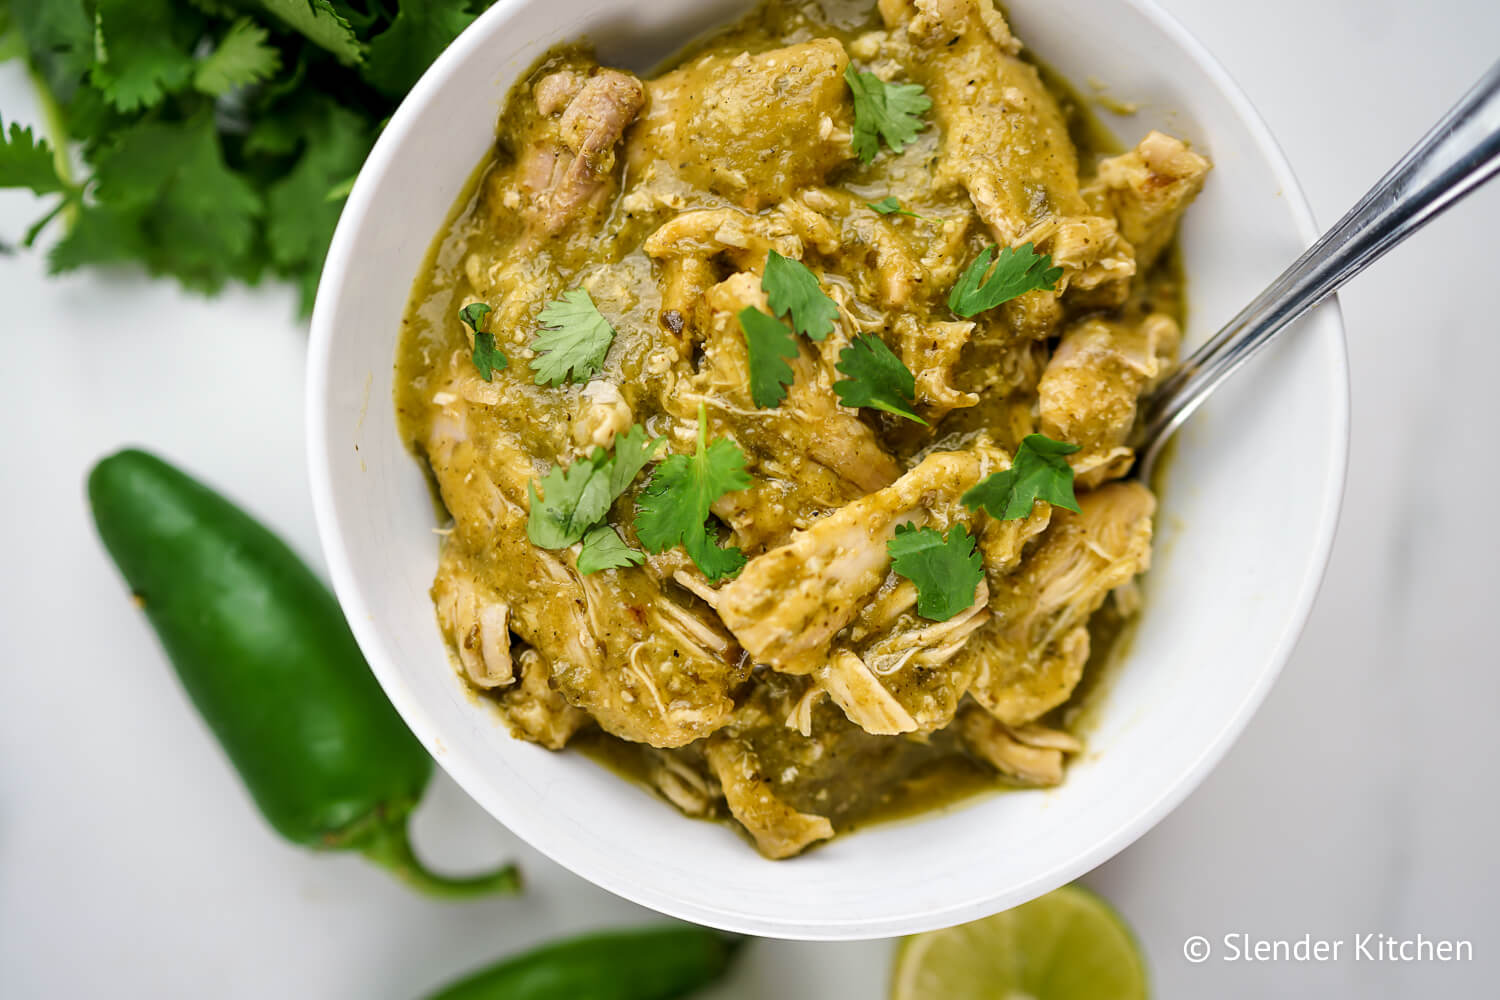 Slow Cooker Chile Verde in a bowl with cilantro and tortillas.